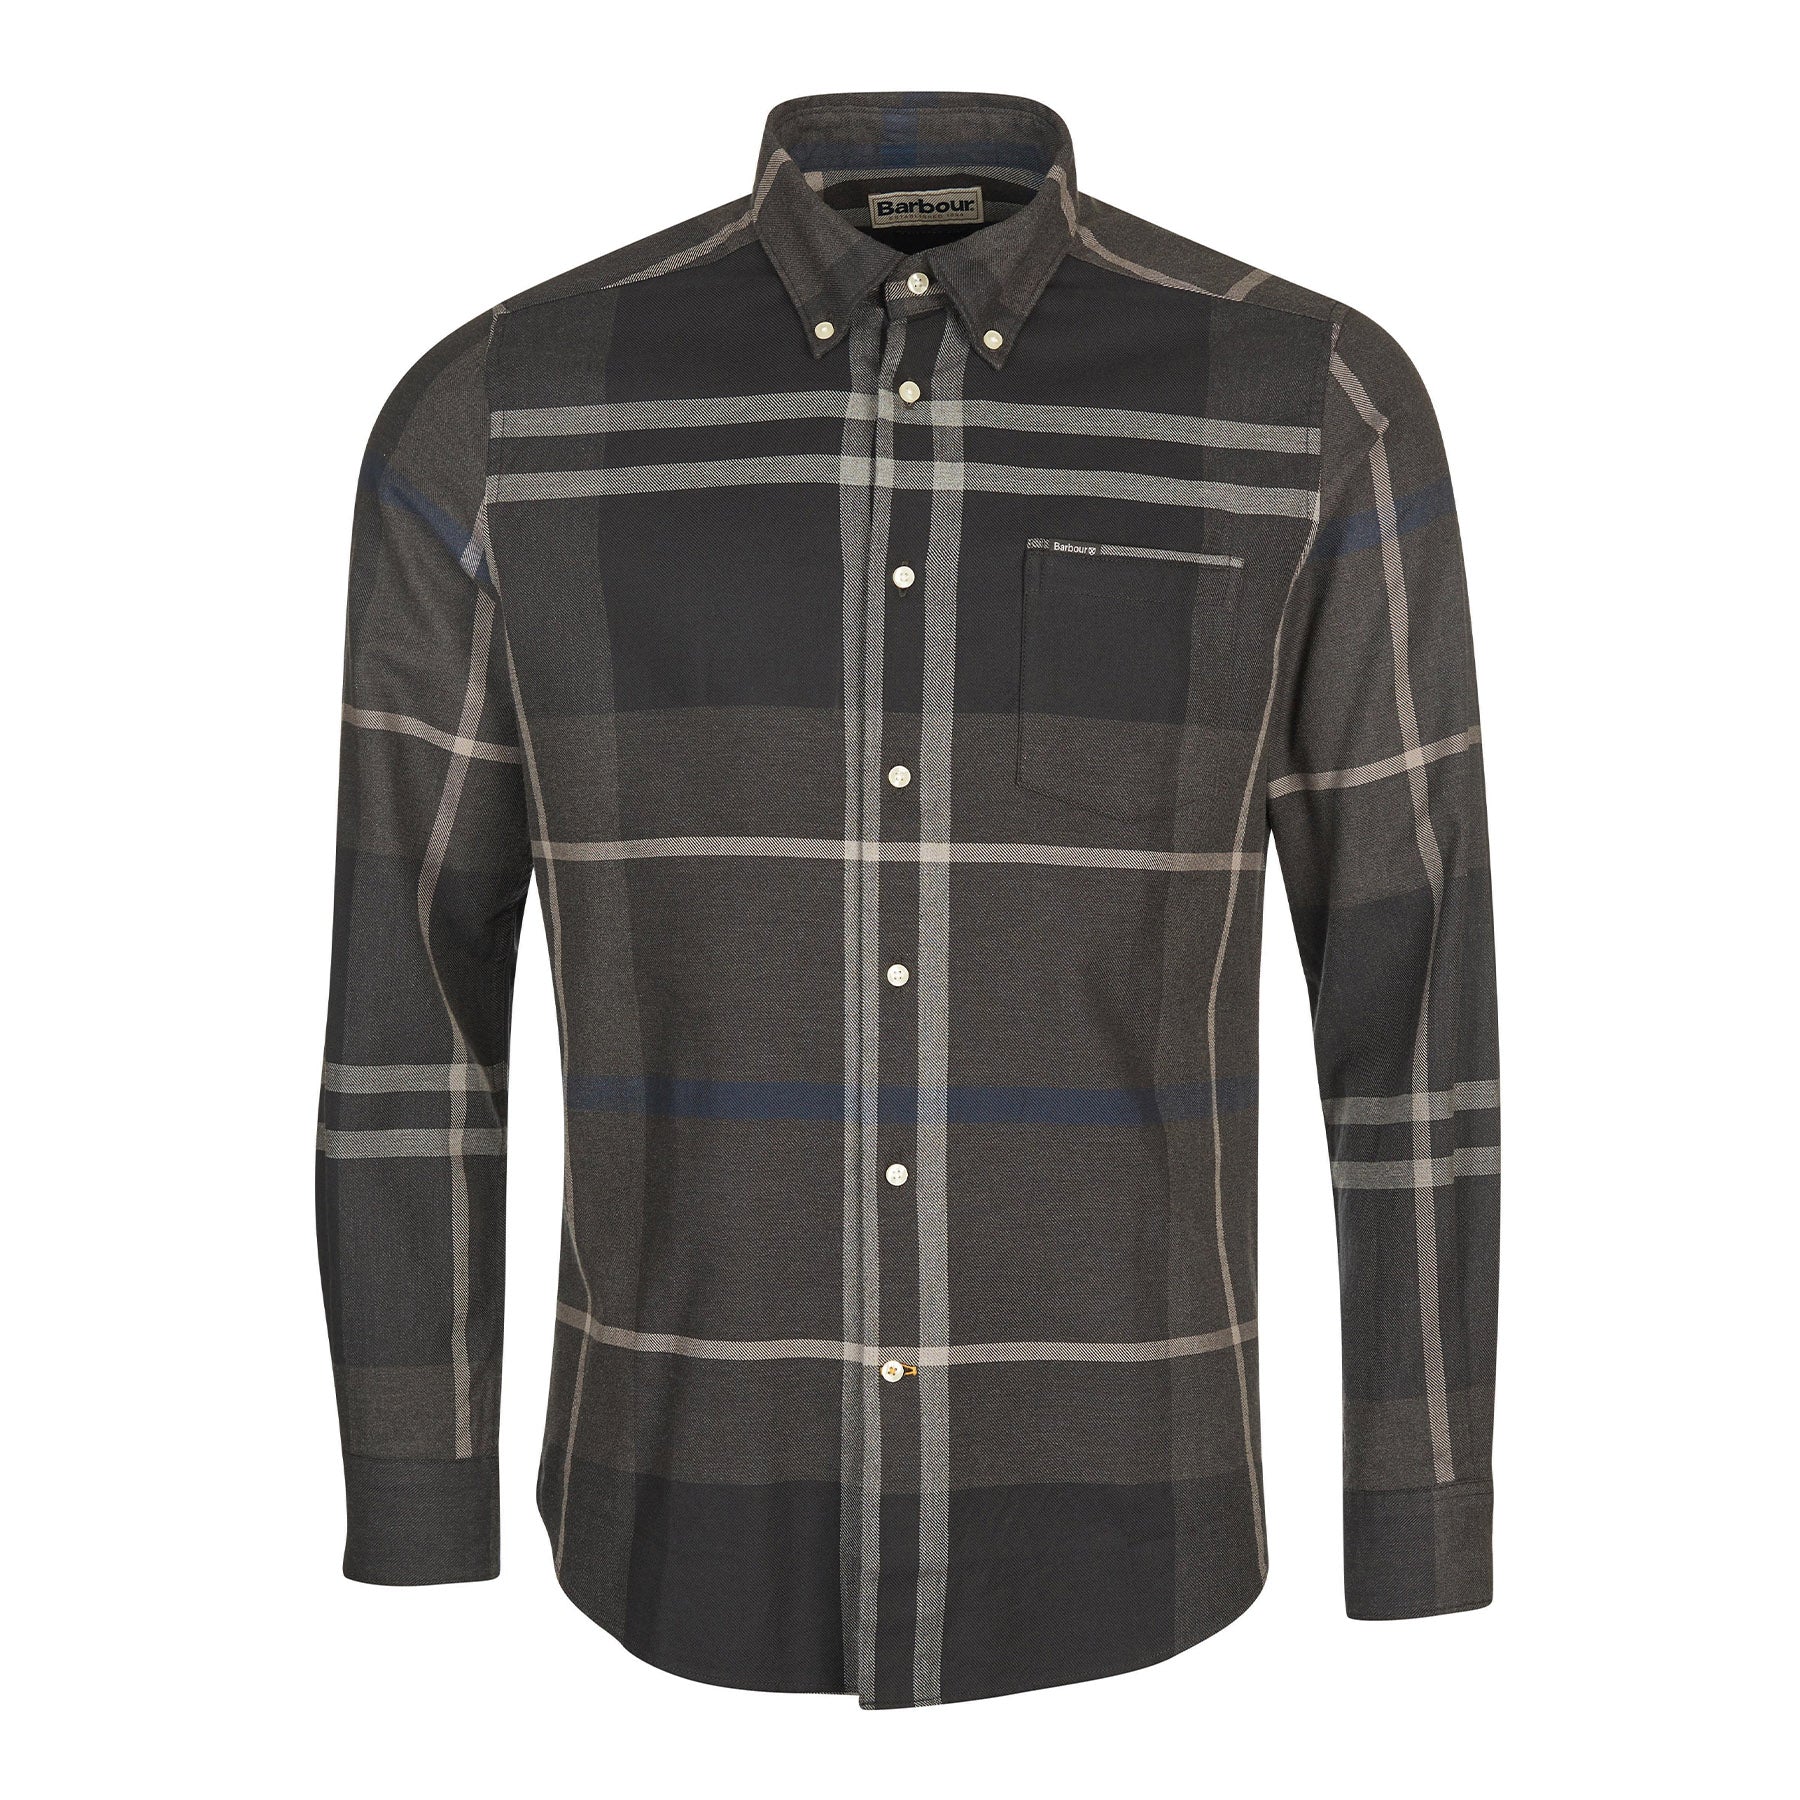 Hero image featuring the front of the Barbour Dunoon tailored shirt in Graphite.